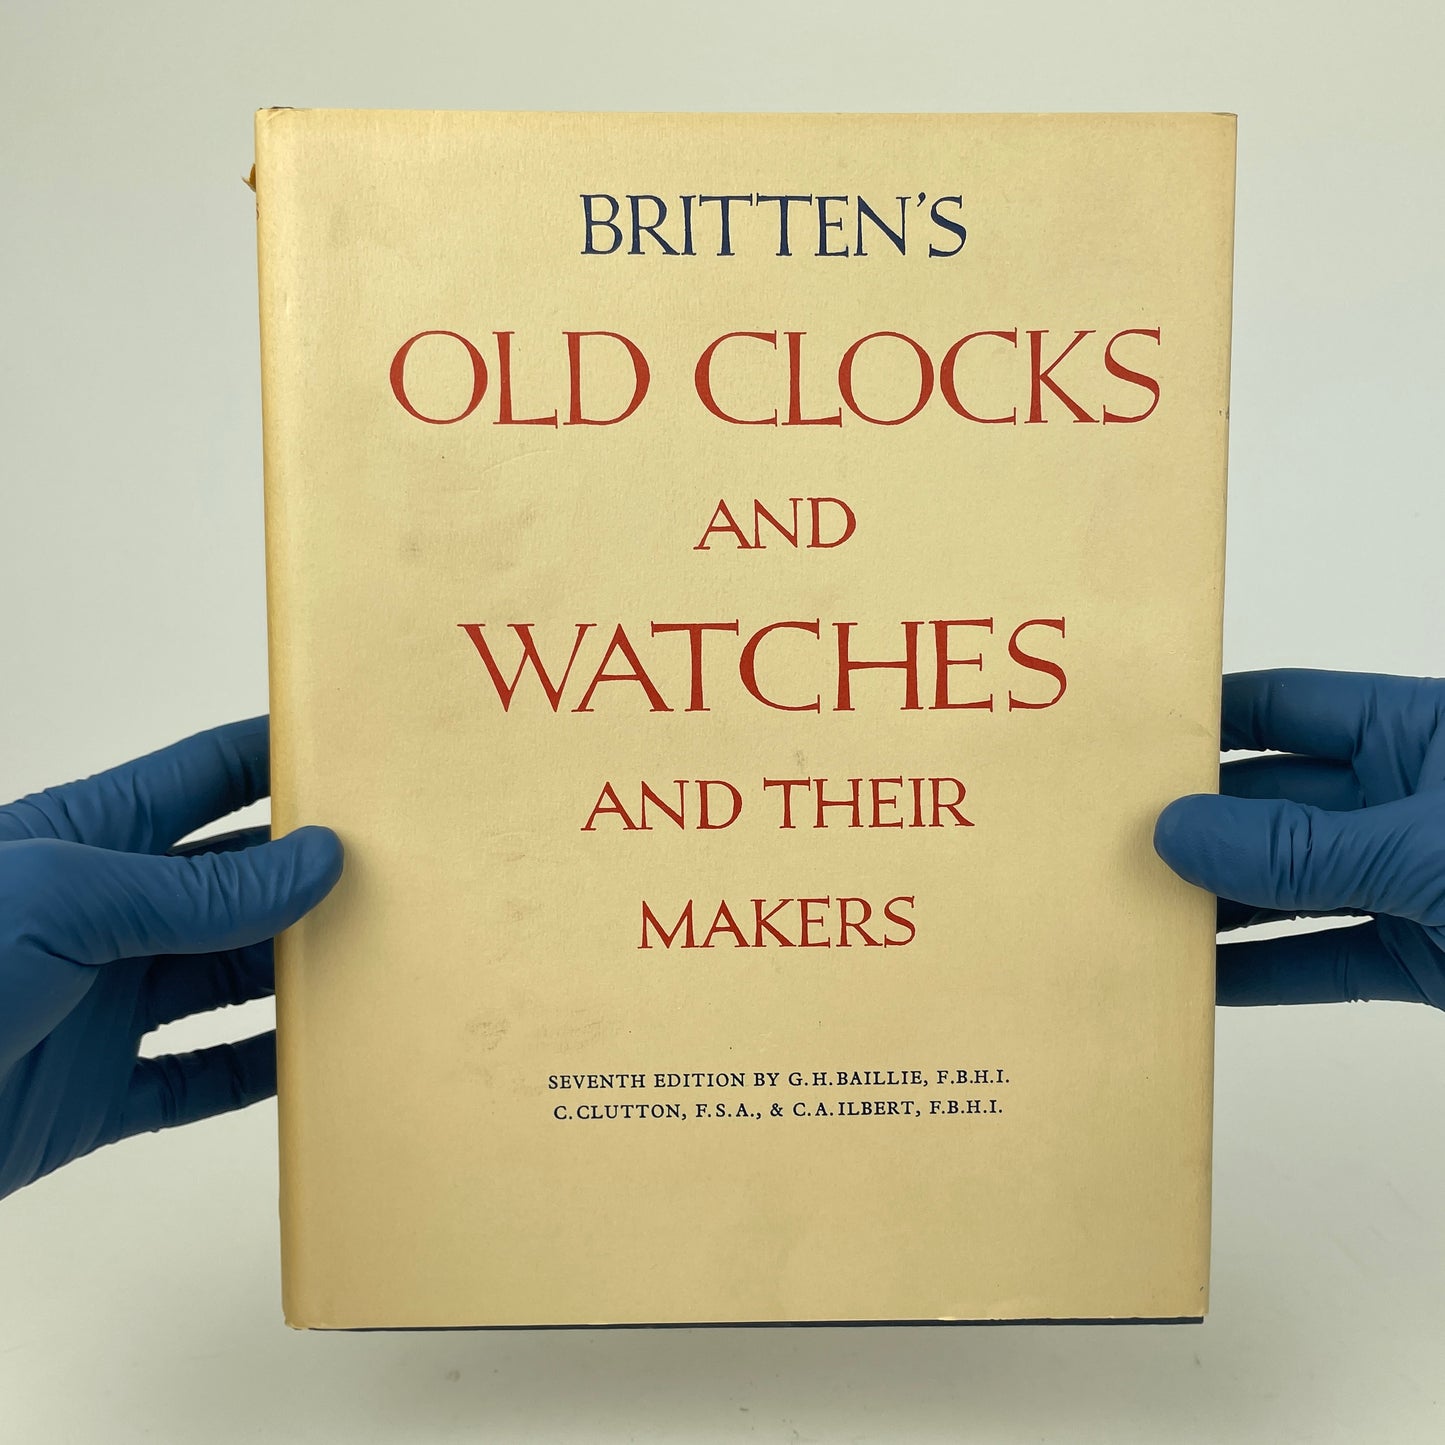 Mar Lot 127- Britten's Old Clocks And Watches And Their Makers Book